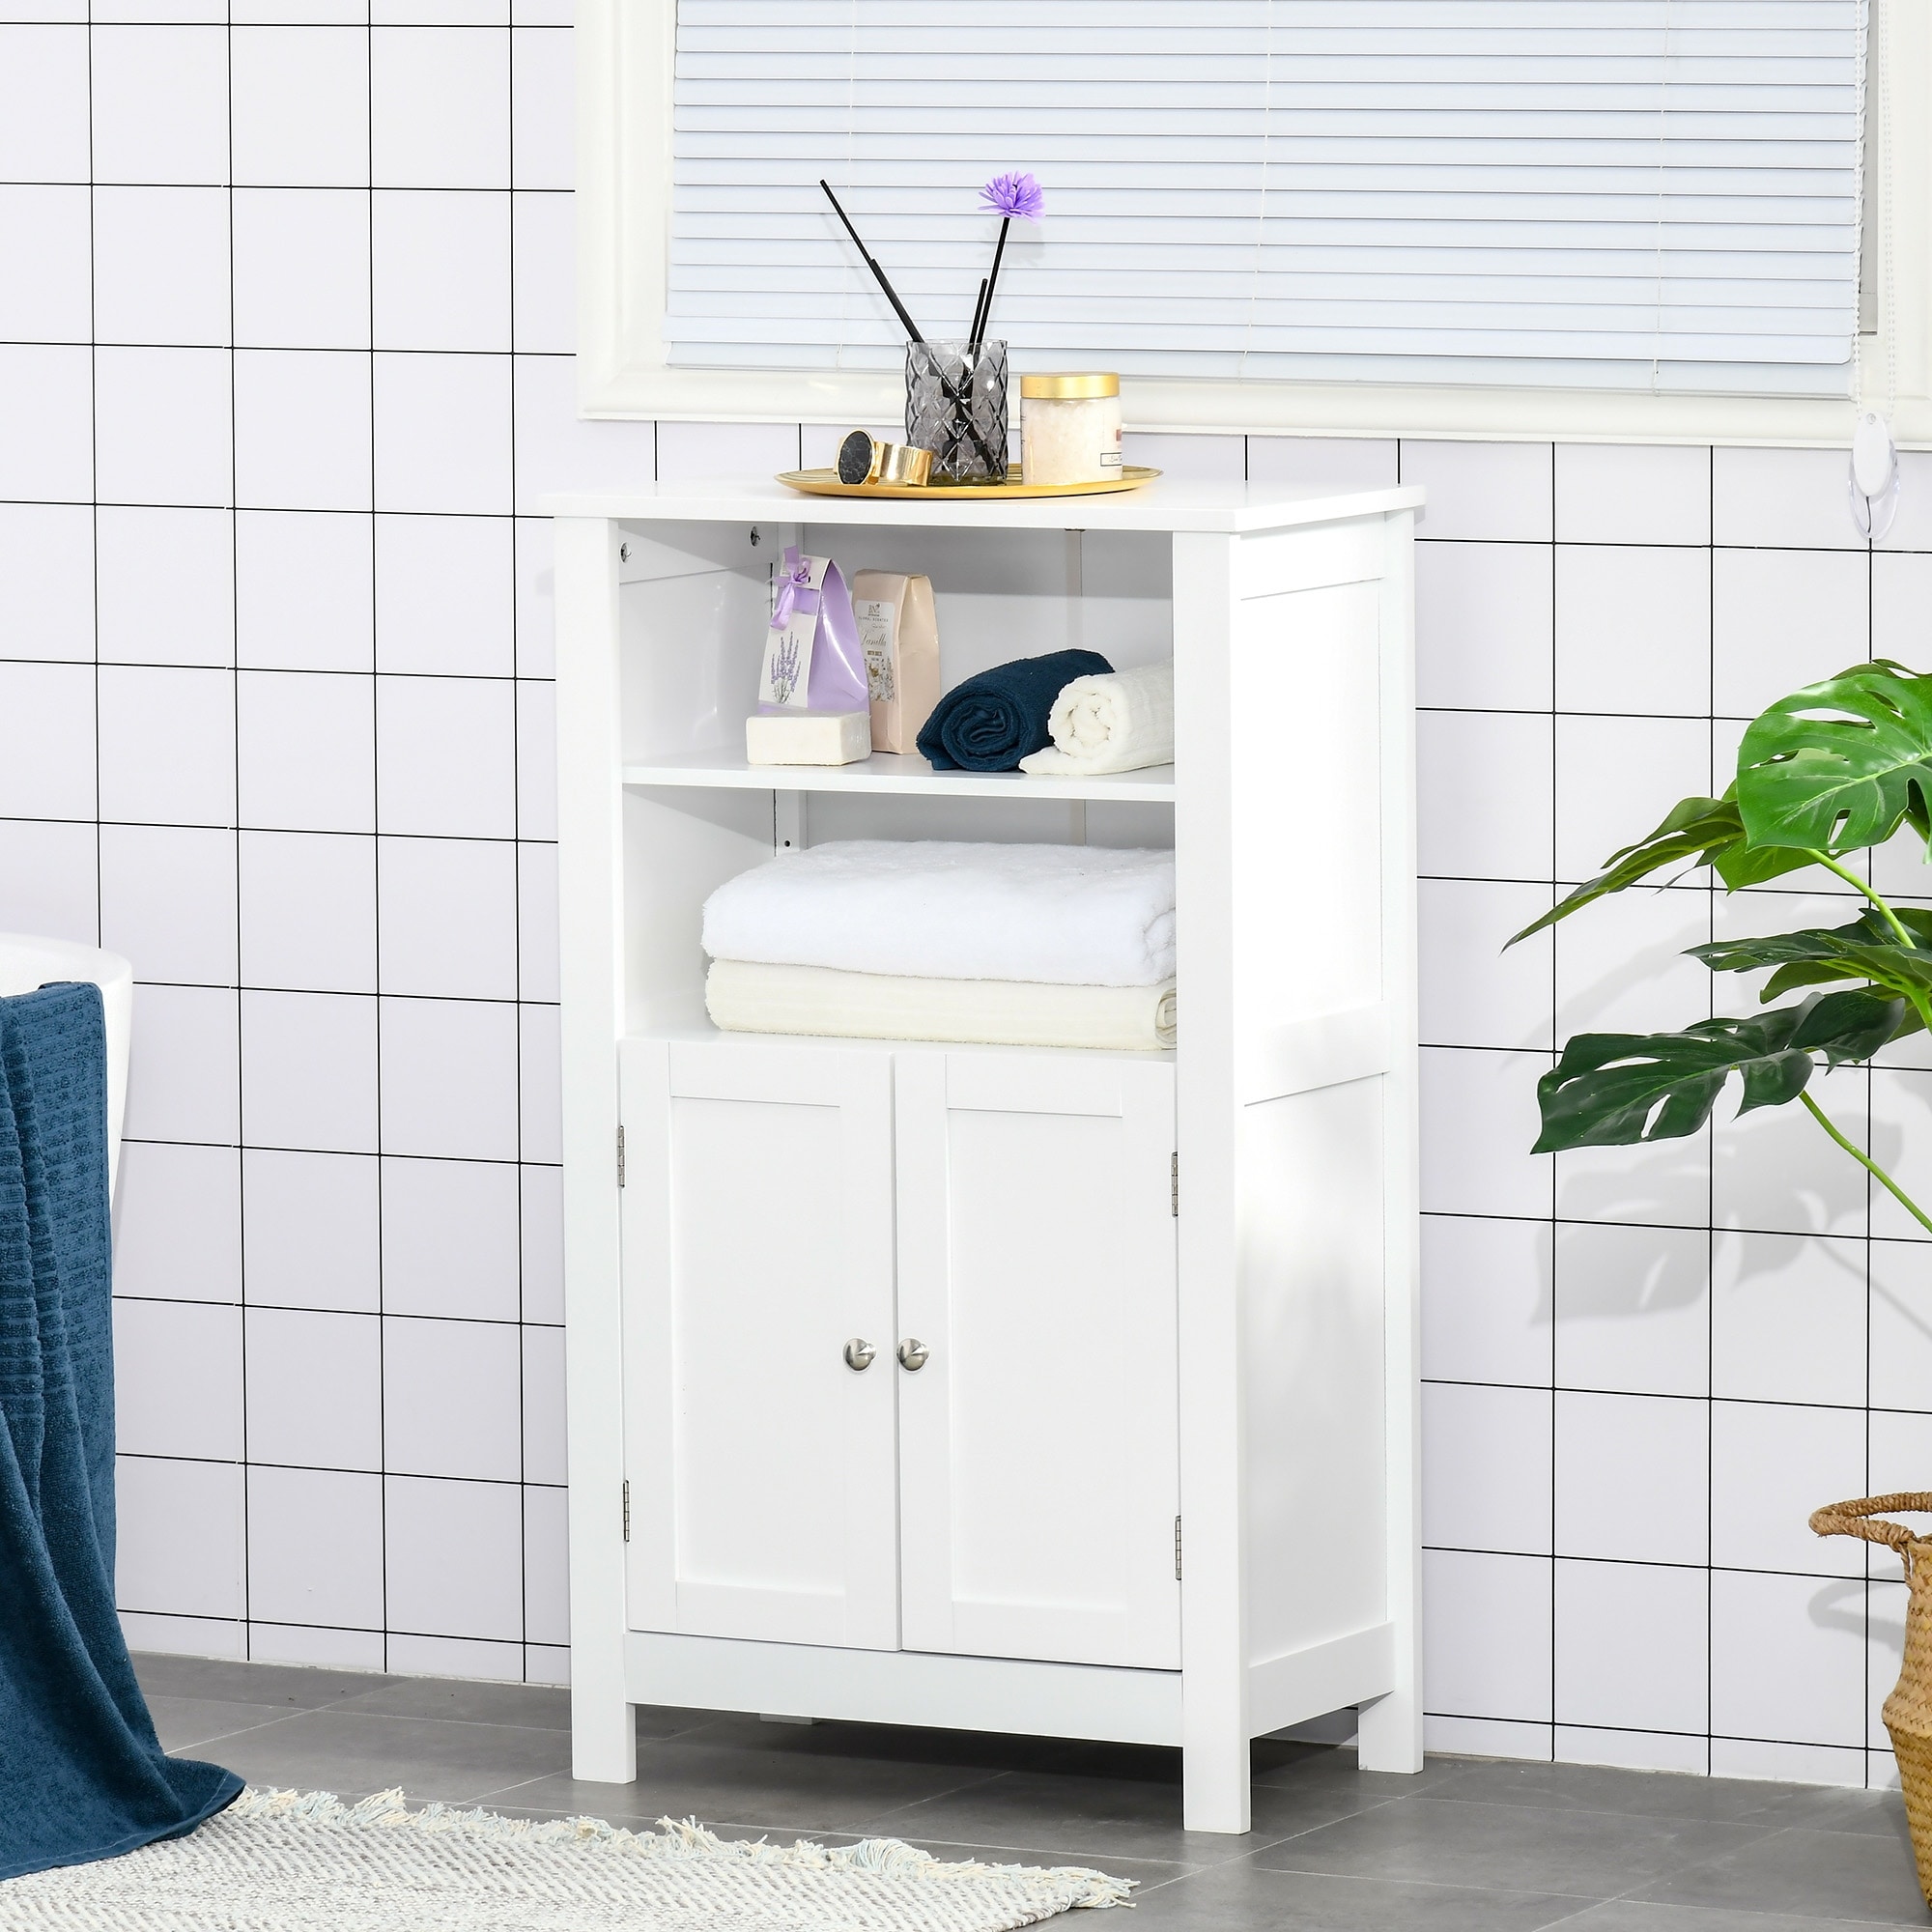 kleankin Small Bathroom Floor Storage Cabinet Free Standing Cupboard Organizer with 1 Drawer and Adjustable Shelf for Living Room, White